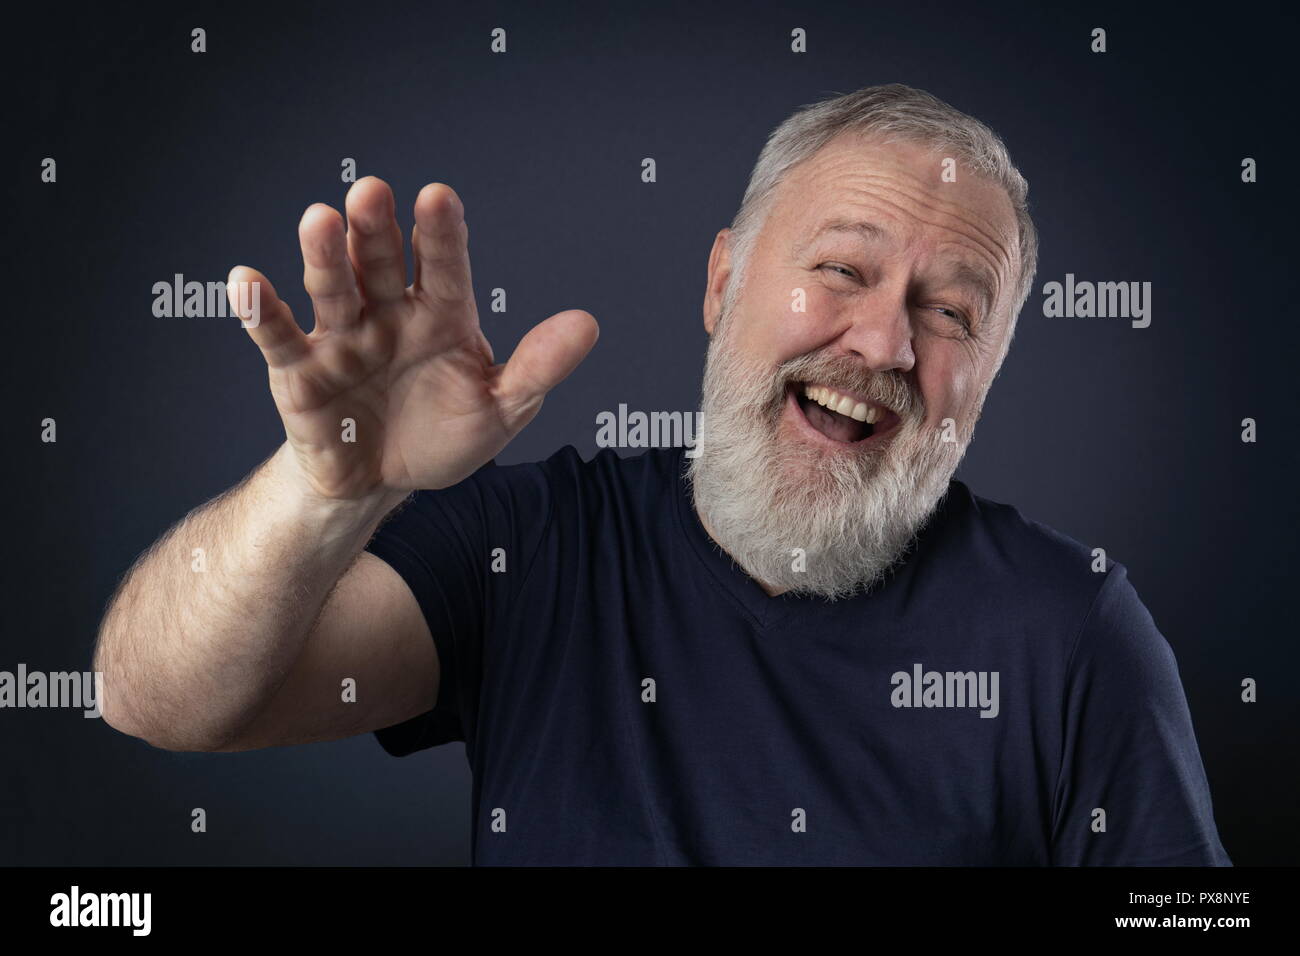 Elderly man with gray beard laughing with his palm up Stock Photo